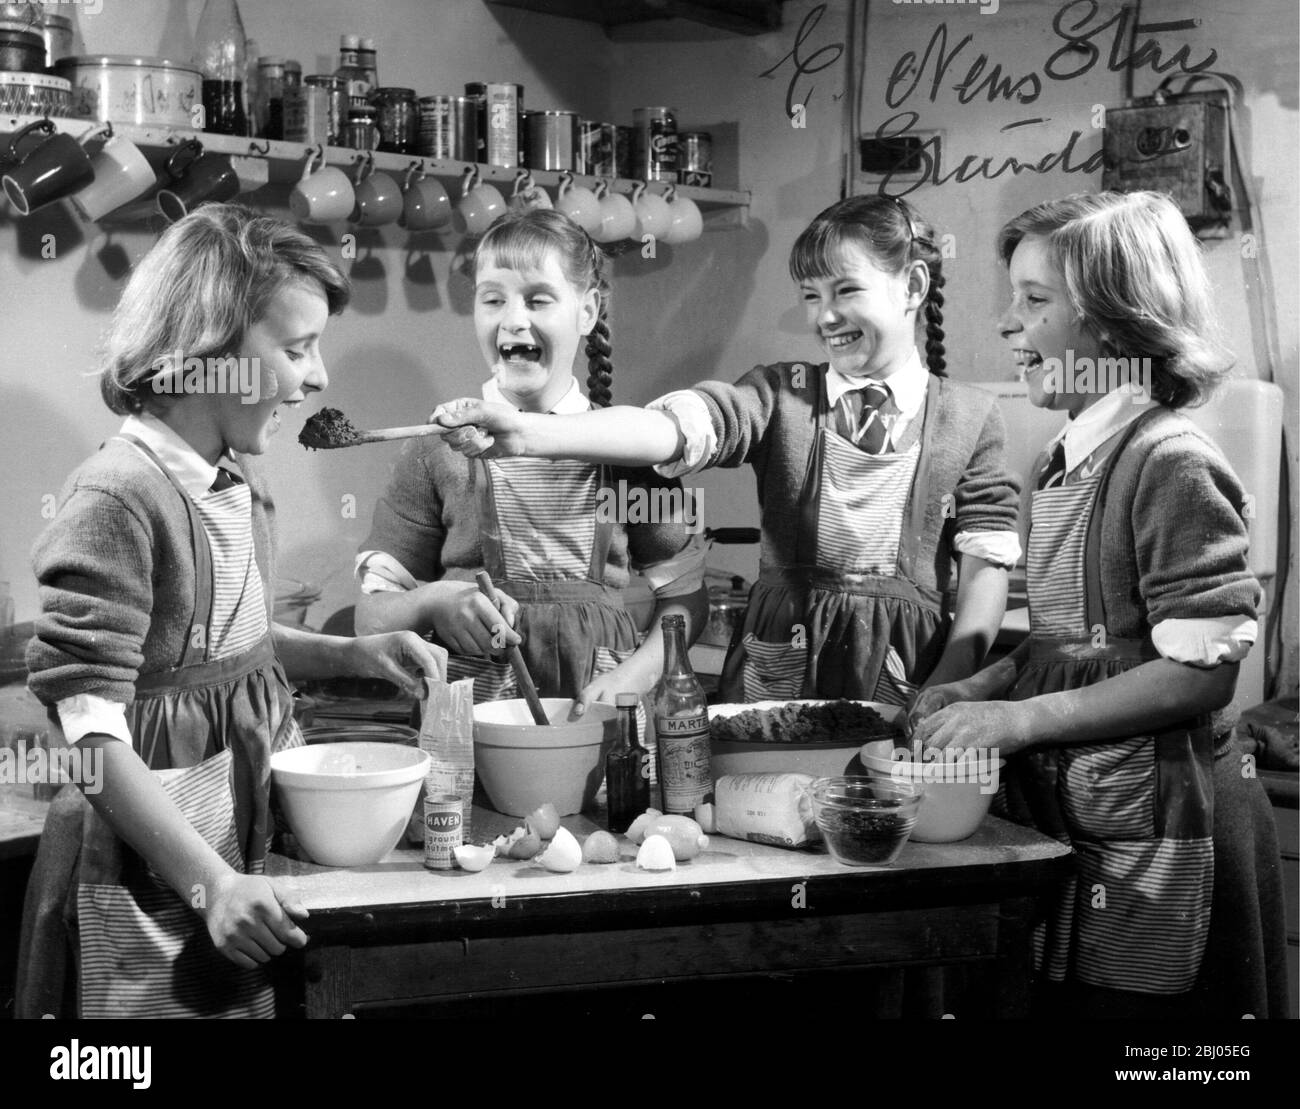 Jennifer, one of the famous Good quads, aged 11, passes a spoonful of the christmas pudding mixture to sister Elizabeth, while Briget and Frances (extreme right) laugh merrily, in the kitchen of their home, Elm Tree Farm in Nettleton, Wiltshire. - 8th December 1959 Stock Photo